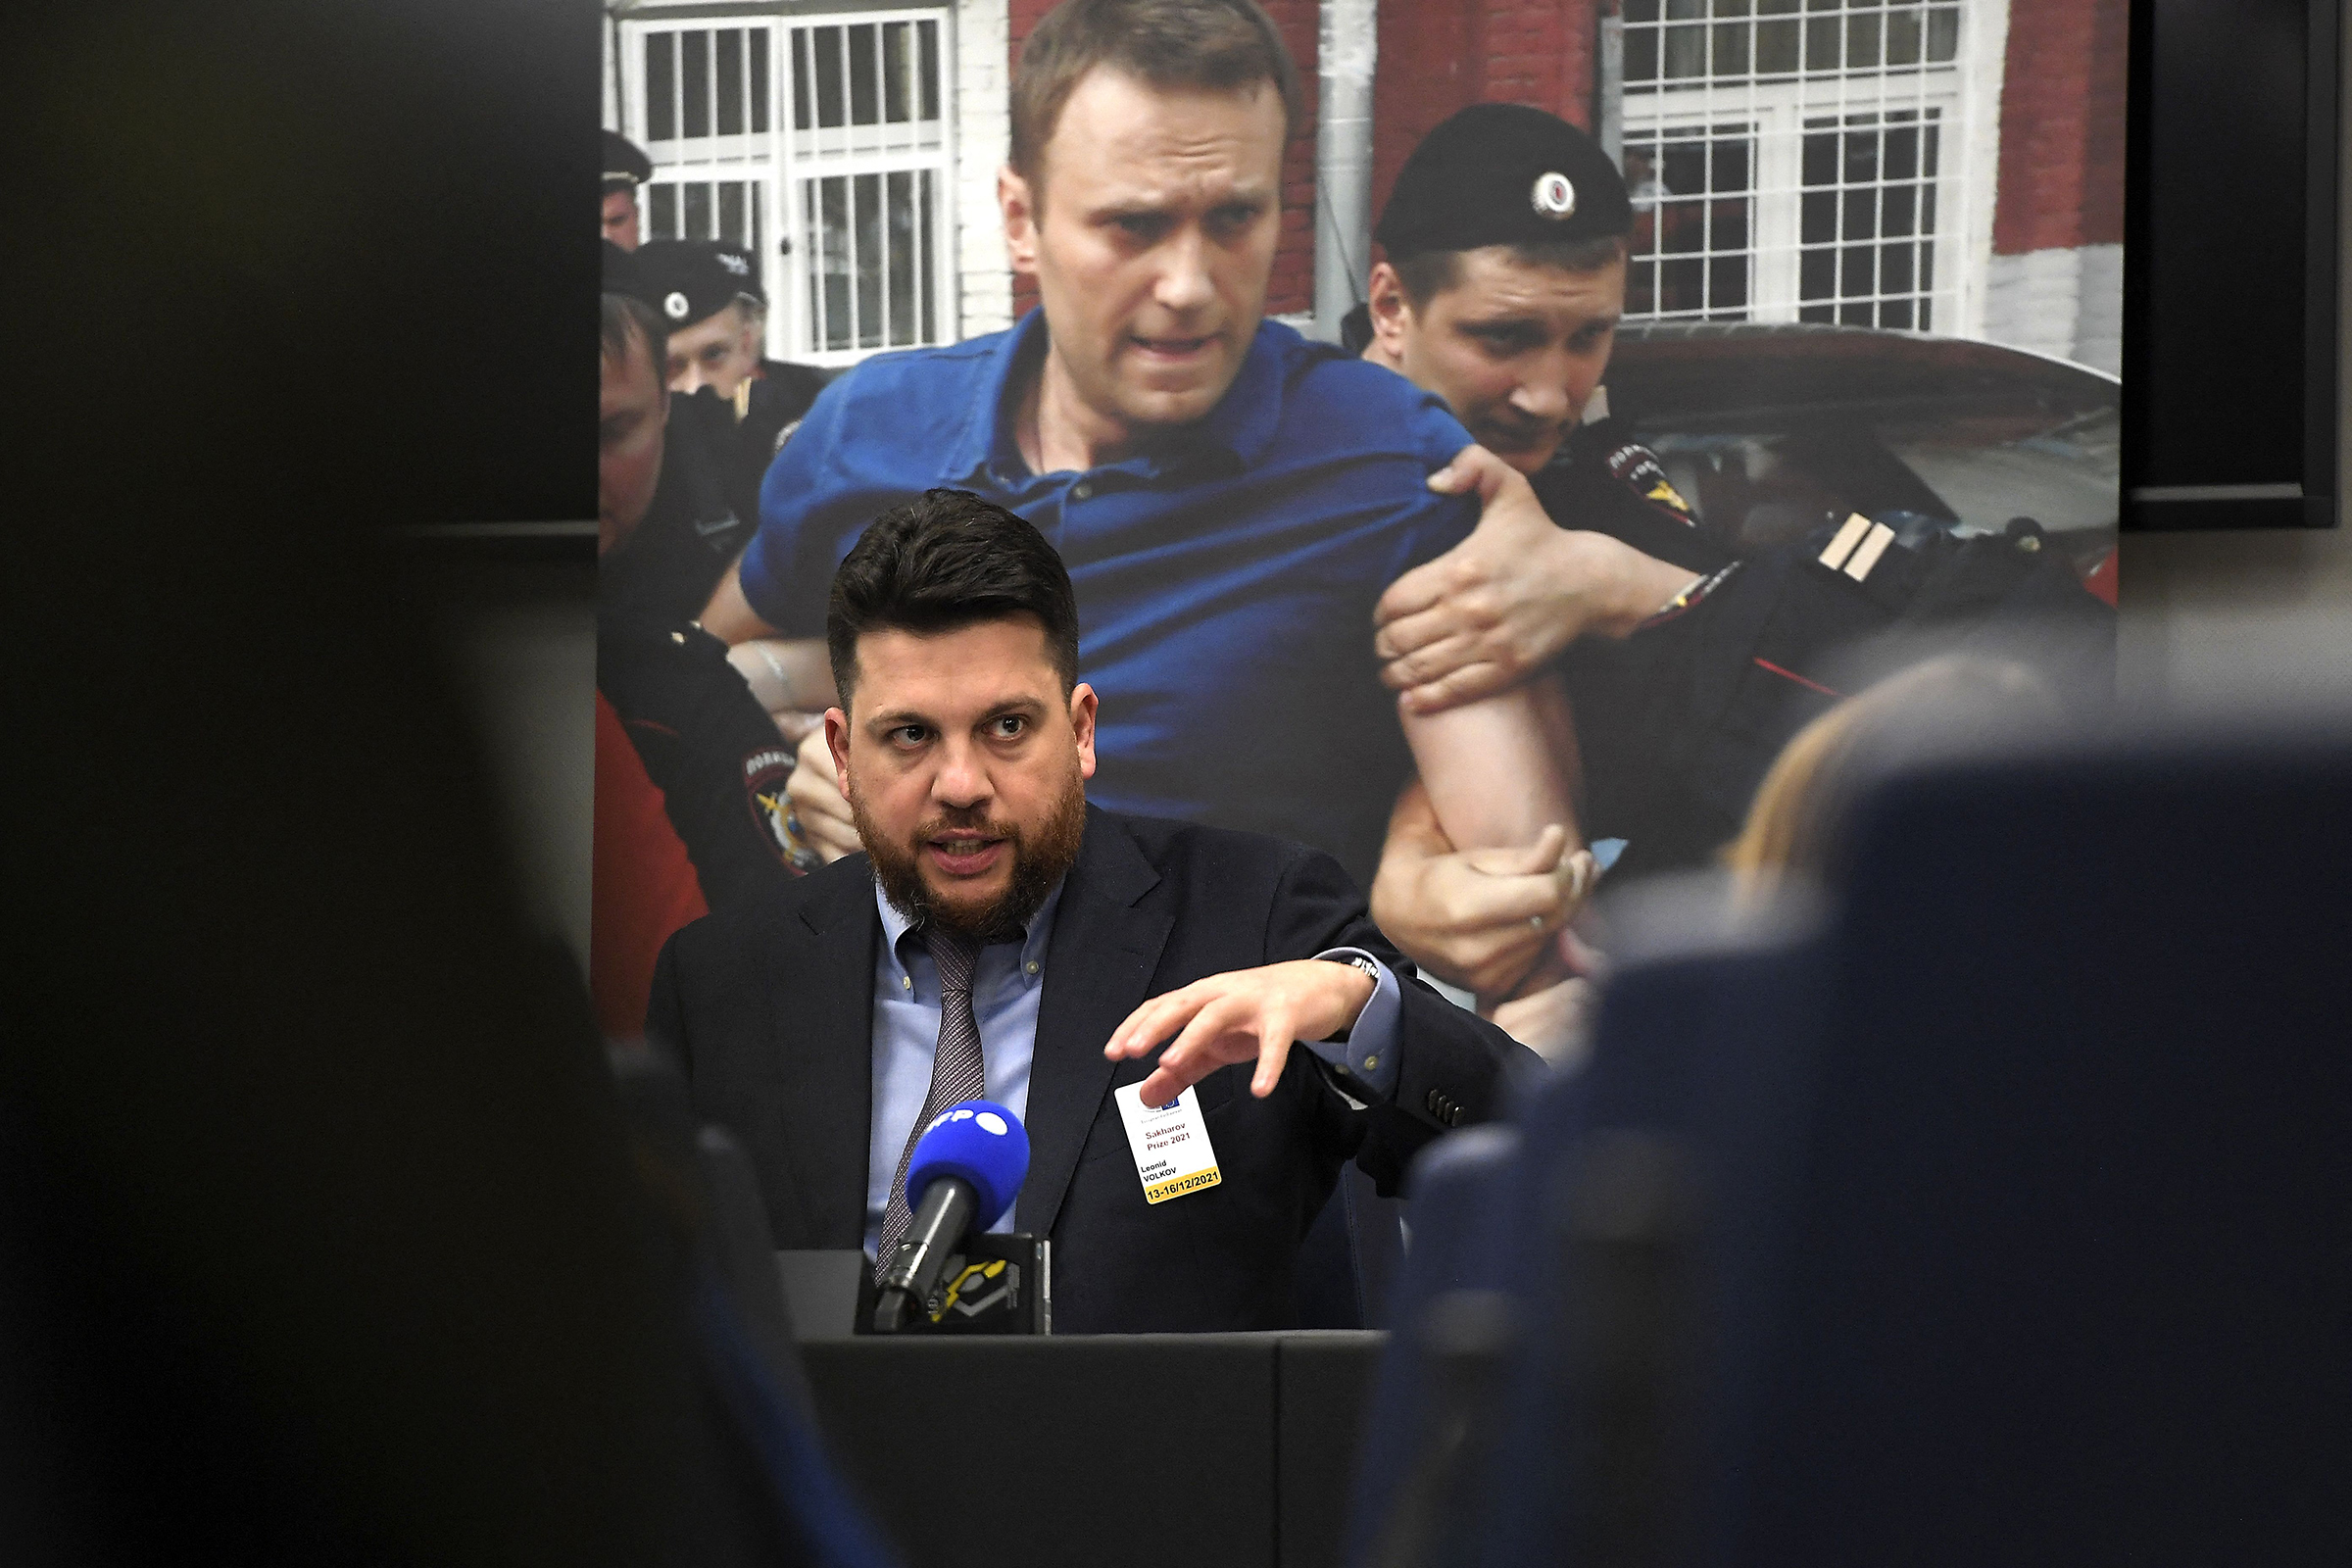 Chief of Staff of Russian opposition leader Alexei Navalny, Leonid Volkov speaks during an interview at the European Parliament in Strasbourg, France on Dec. 14, 2021 (Frederick Florin—AFP/Getty Images)